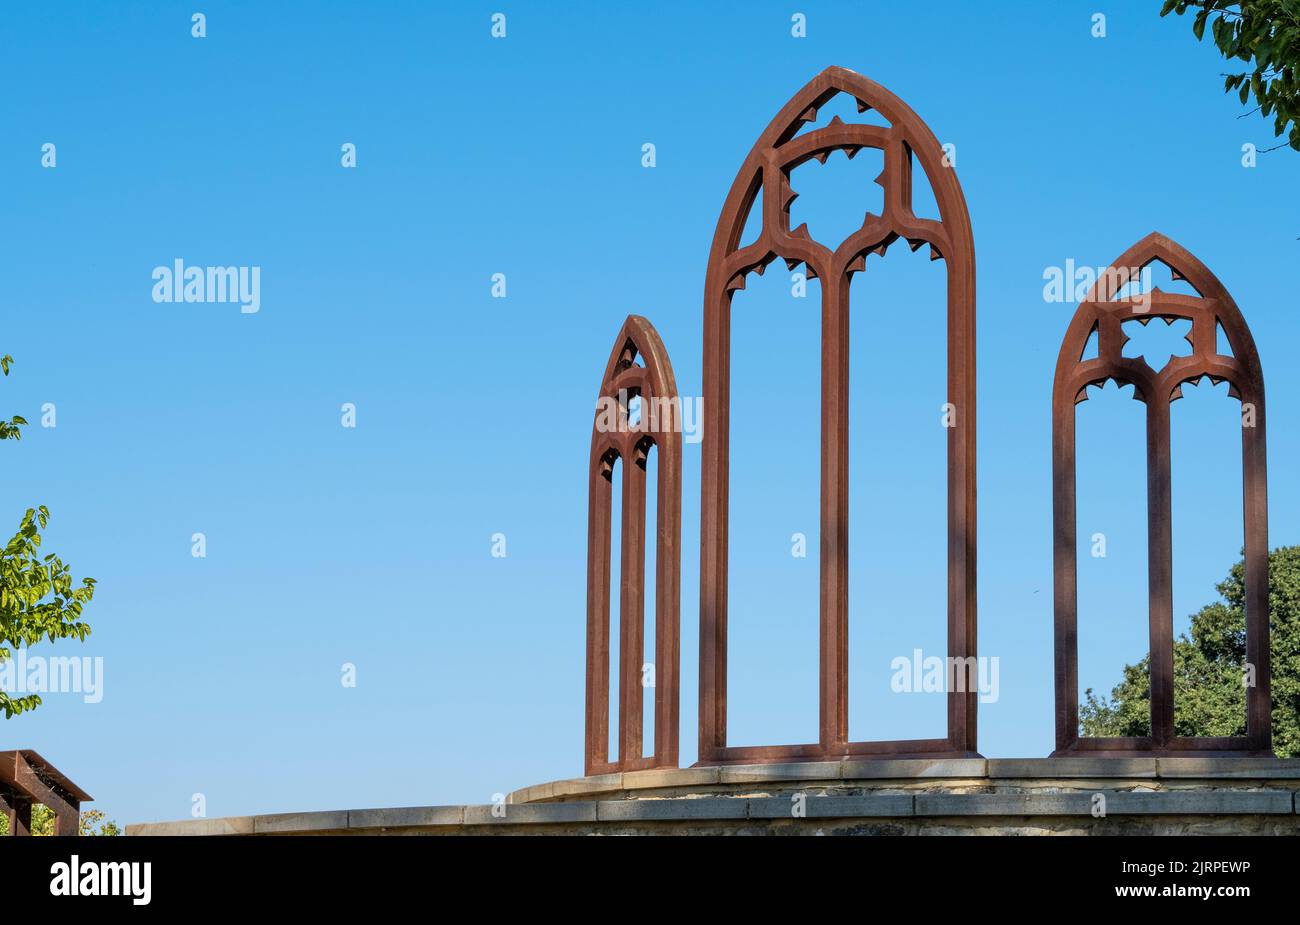 The iron window frames at Lesnes Abbey, the 12th Century built monastery located at Abbey Wood, in the London Borough of Bexley, United Kingdom. Stock Photo